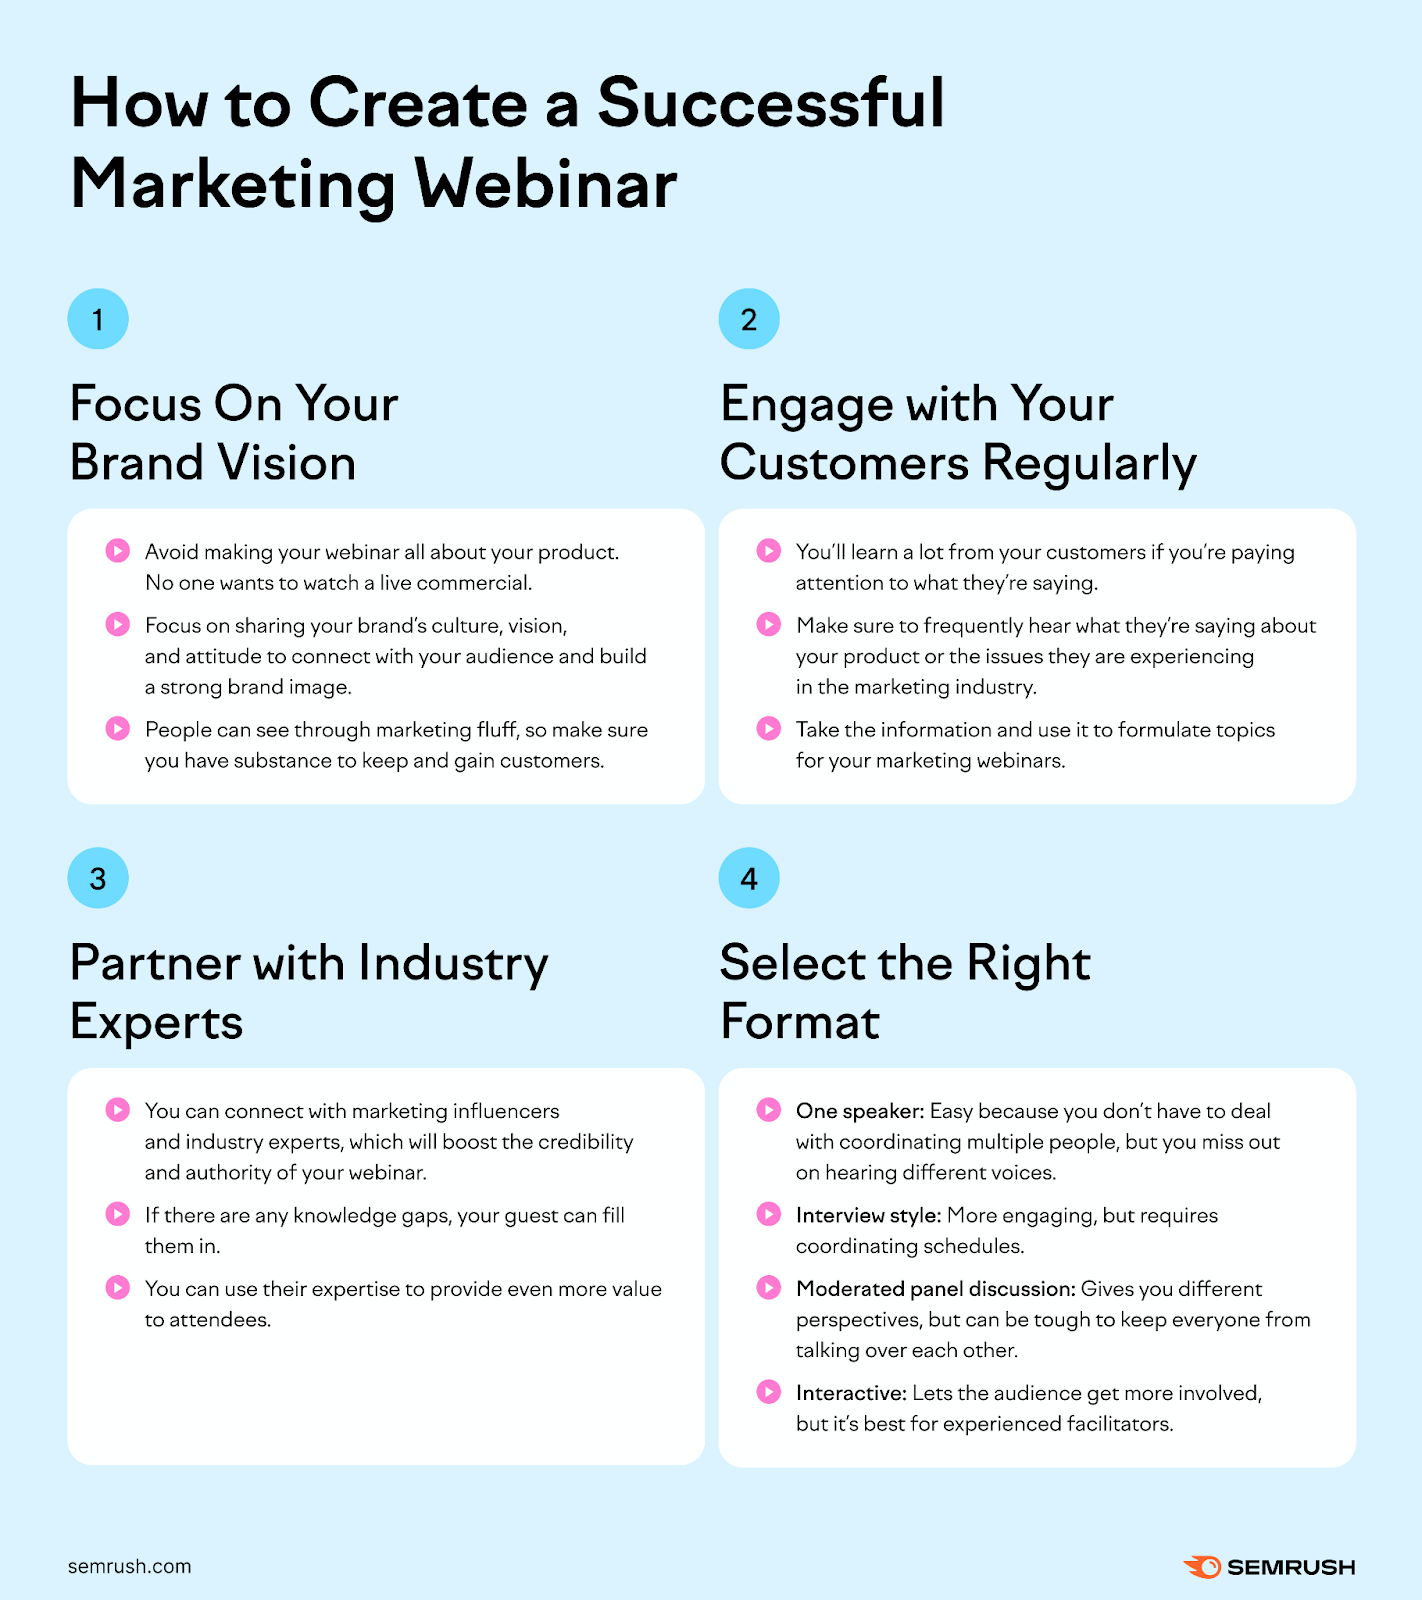 Semrush's infographic providing tips on how to create a successful marketing webinar